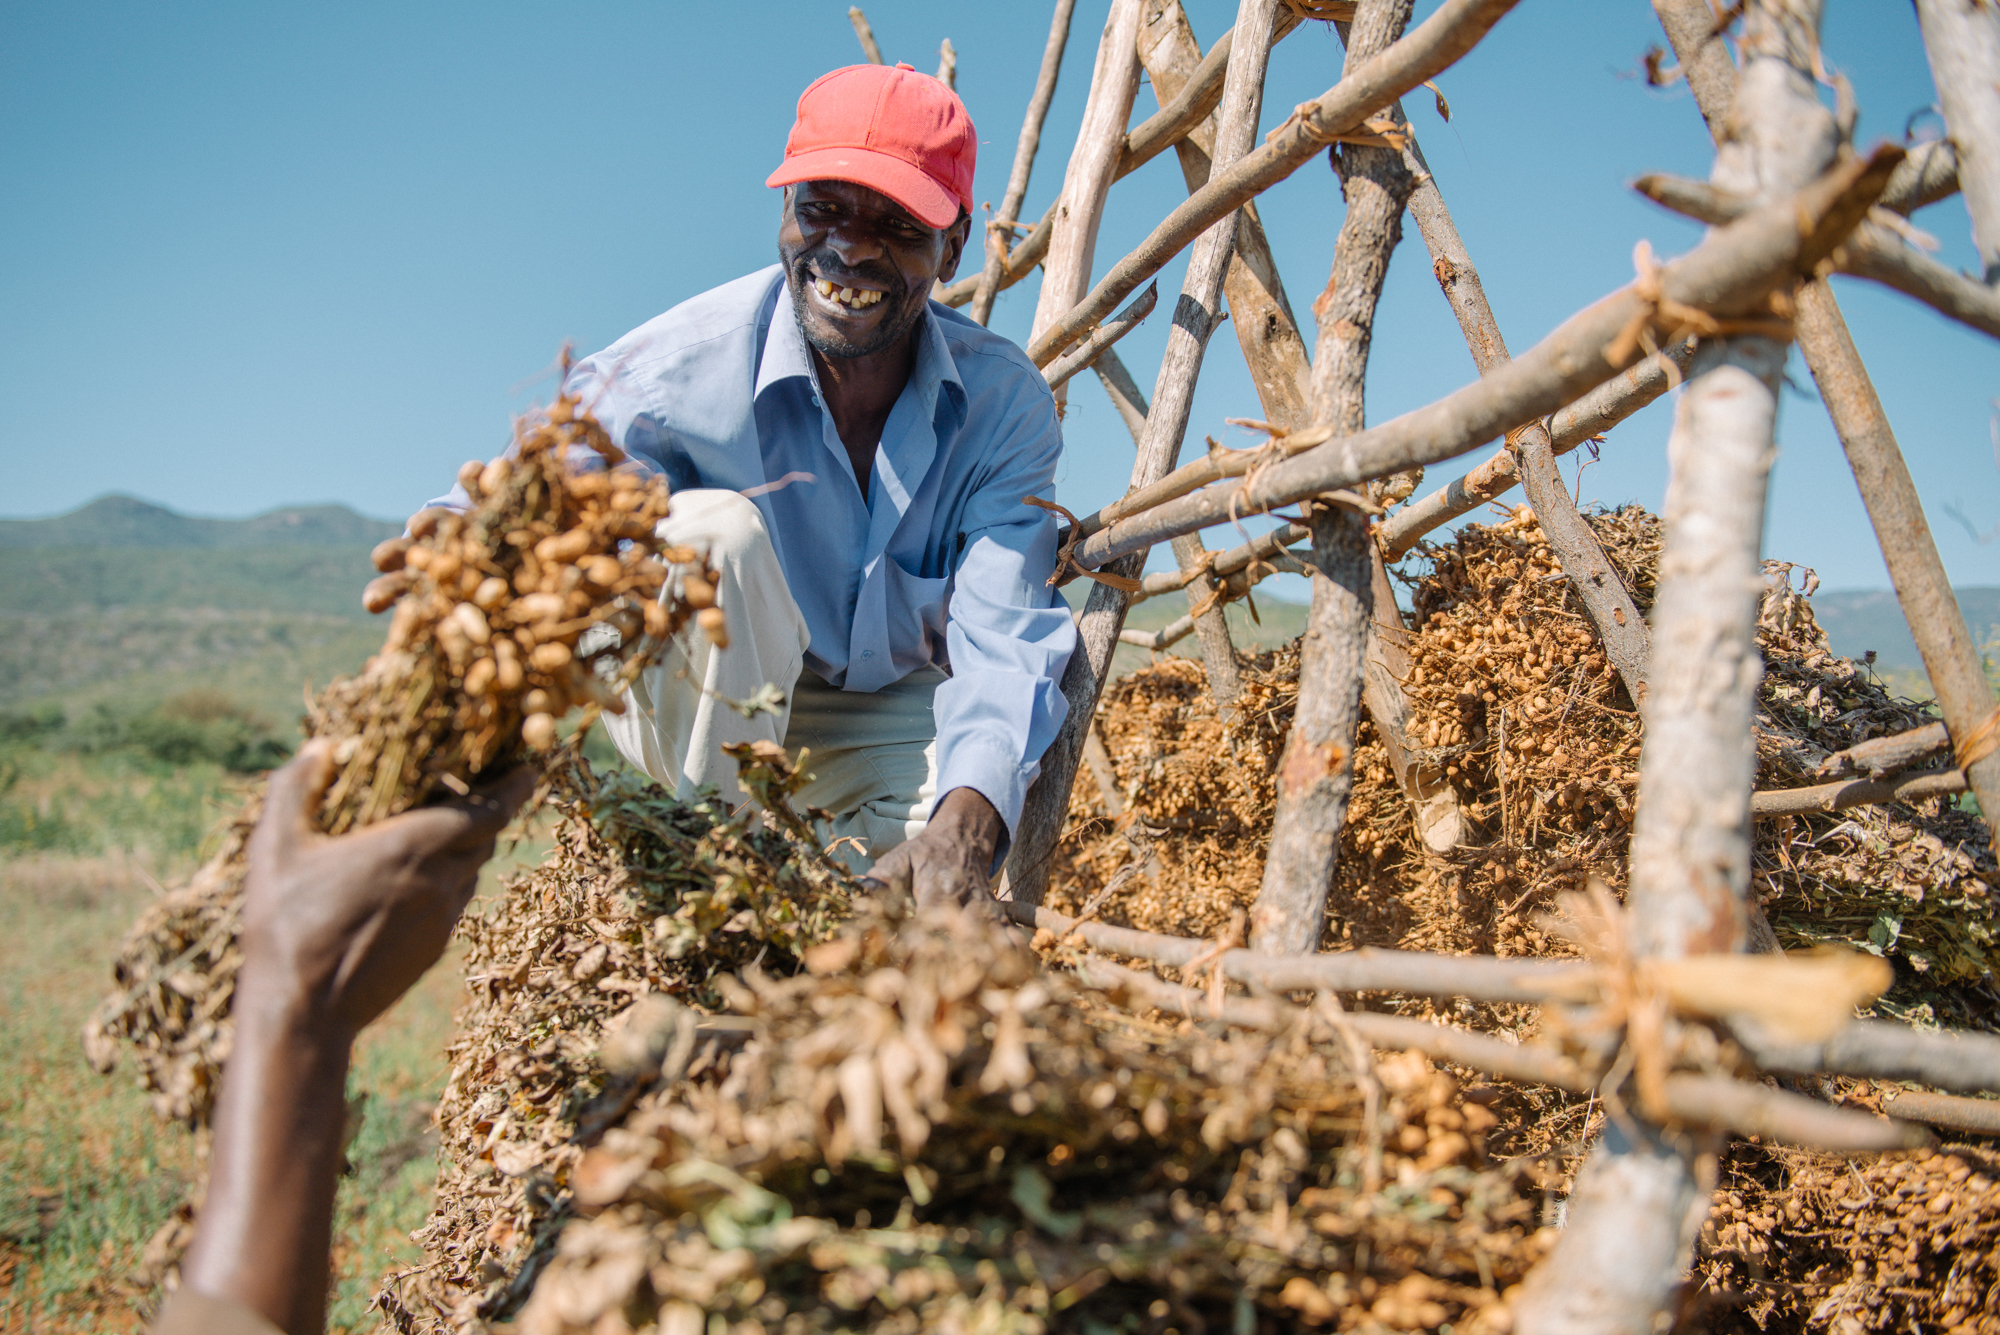 Image: Farmer Elias Chirinda drying his jugo bean (Bambara groundnut) crop in Chimanimani, TSURO, Zimbabwe. Credit: Xavier Vahed for Seed and Knowledge Initiative (SKI). SKI has granted authorisation to use the image in this article.